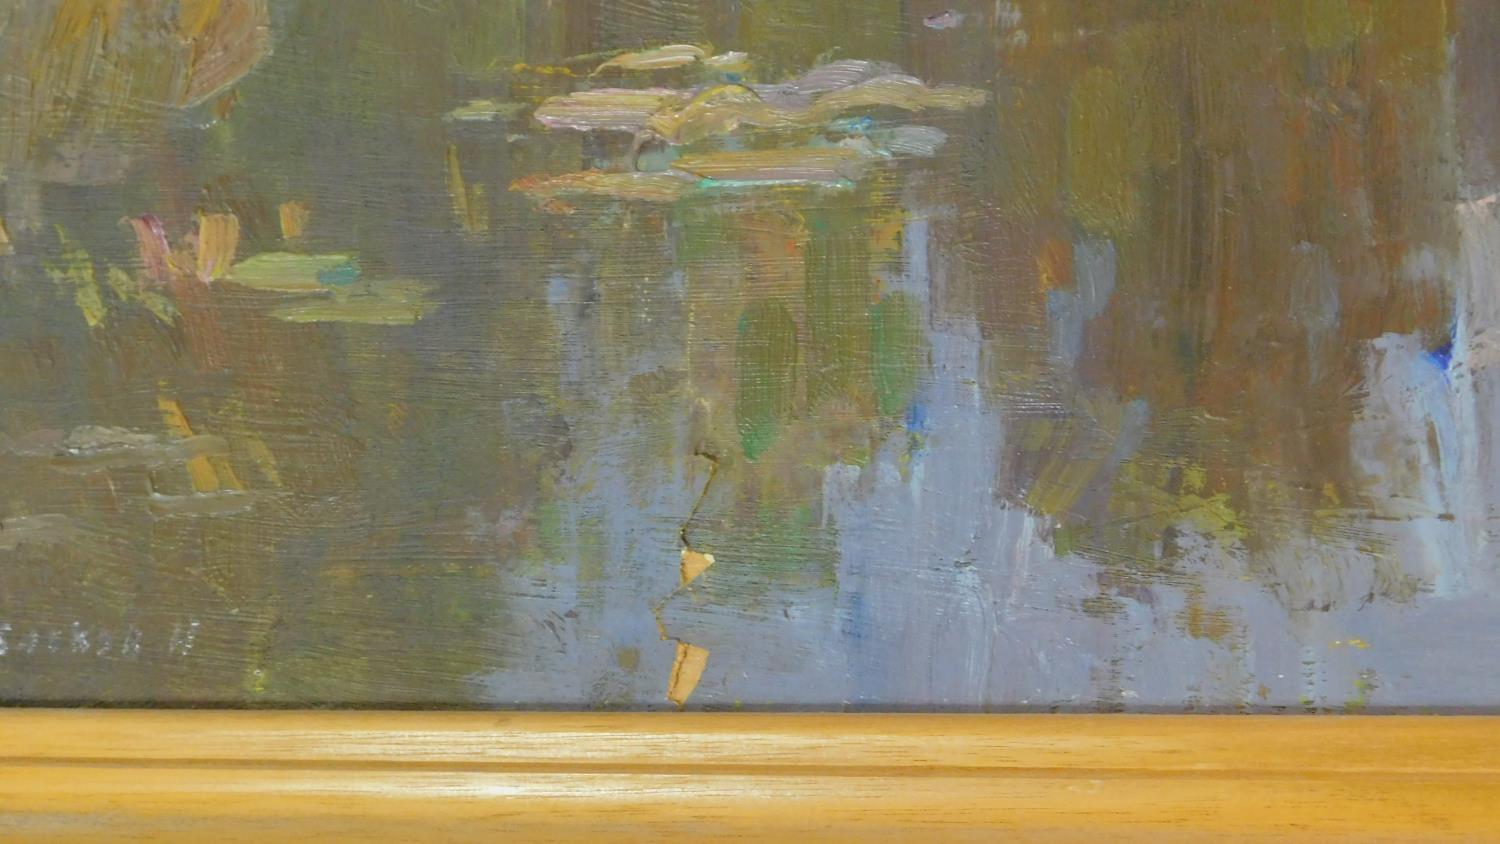 A framed oil on board, silver birches in a lakescape, signed in Russsian cyrillic, possibly N. - Image 5 of 6